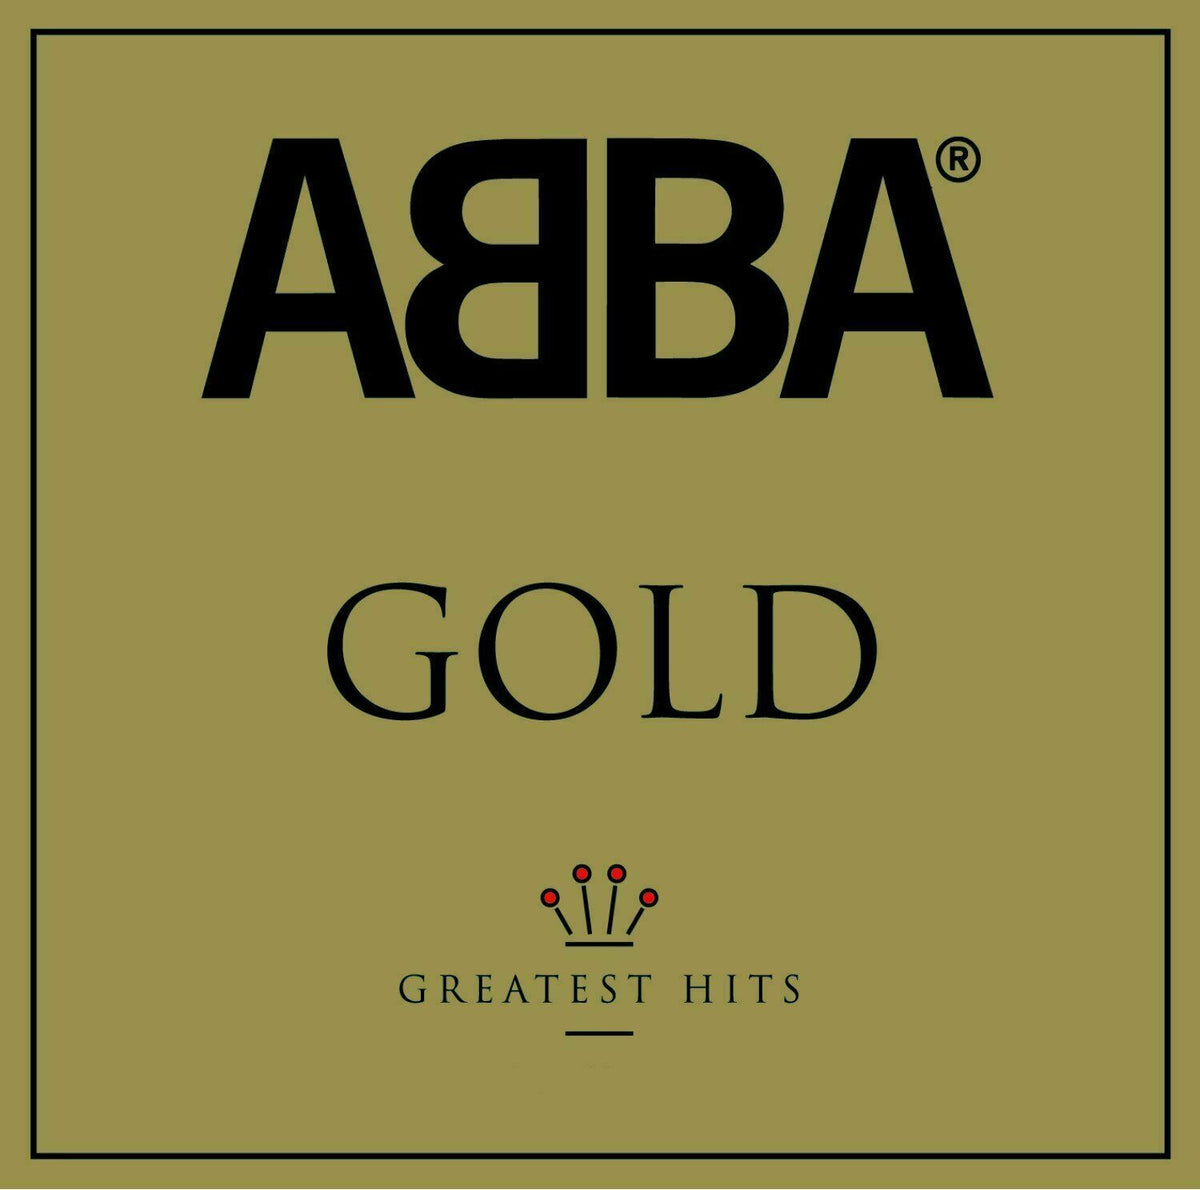 Abba - Gold Greatest Hits (CD)